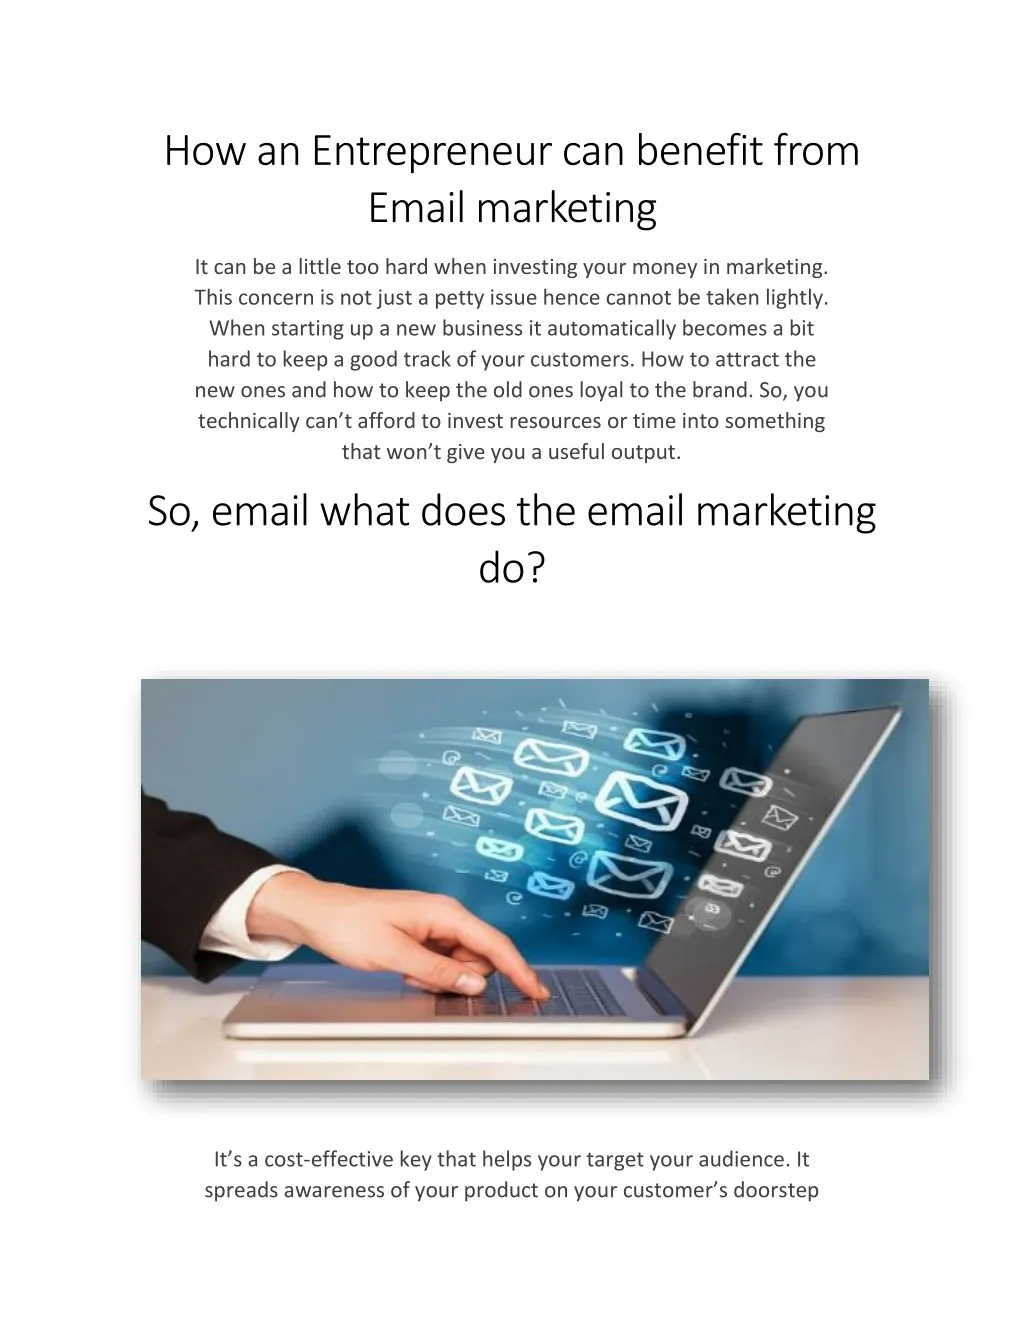 how an entrepreneur can benefit from email